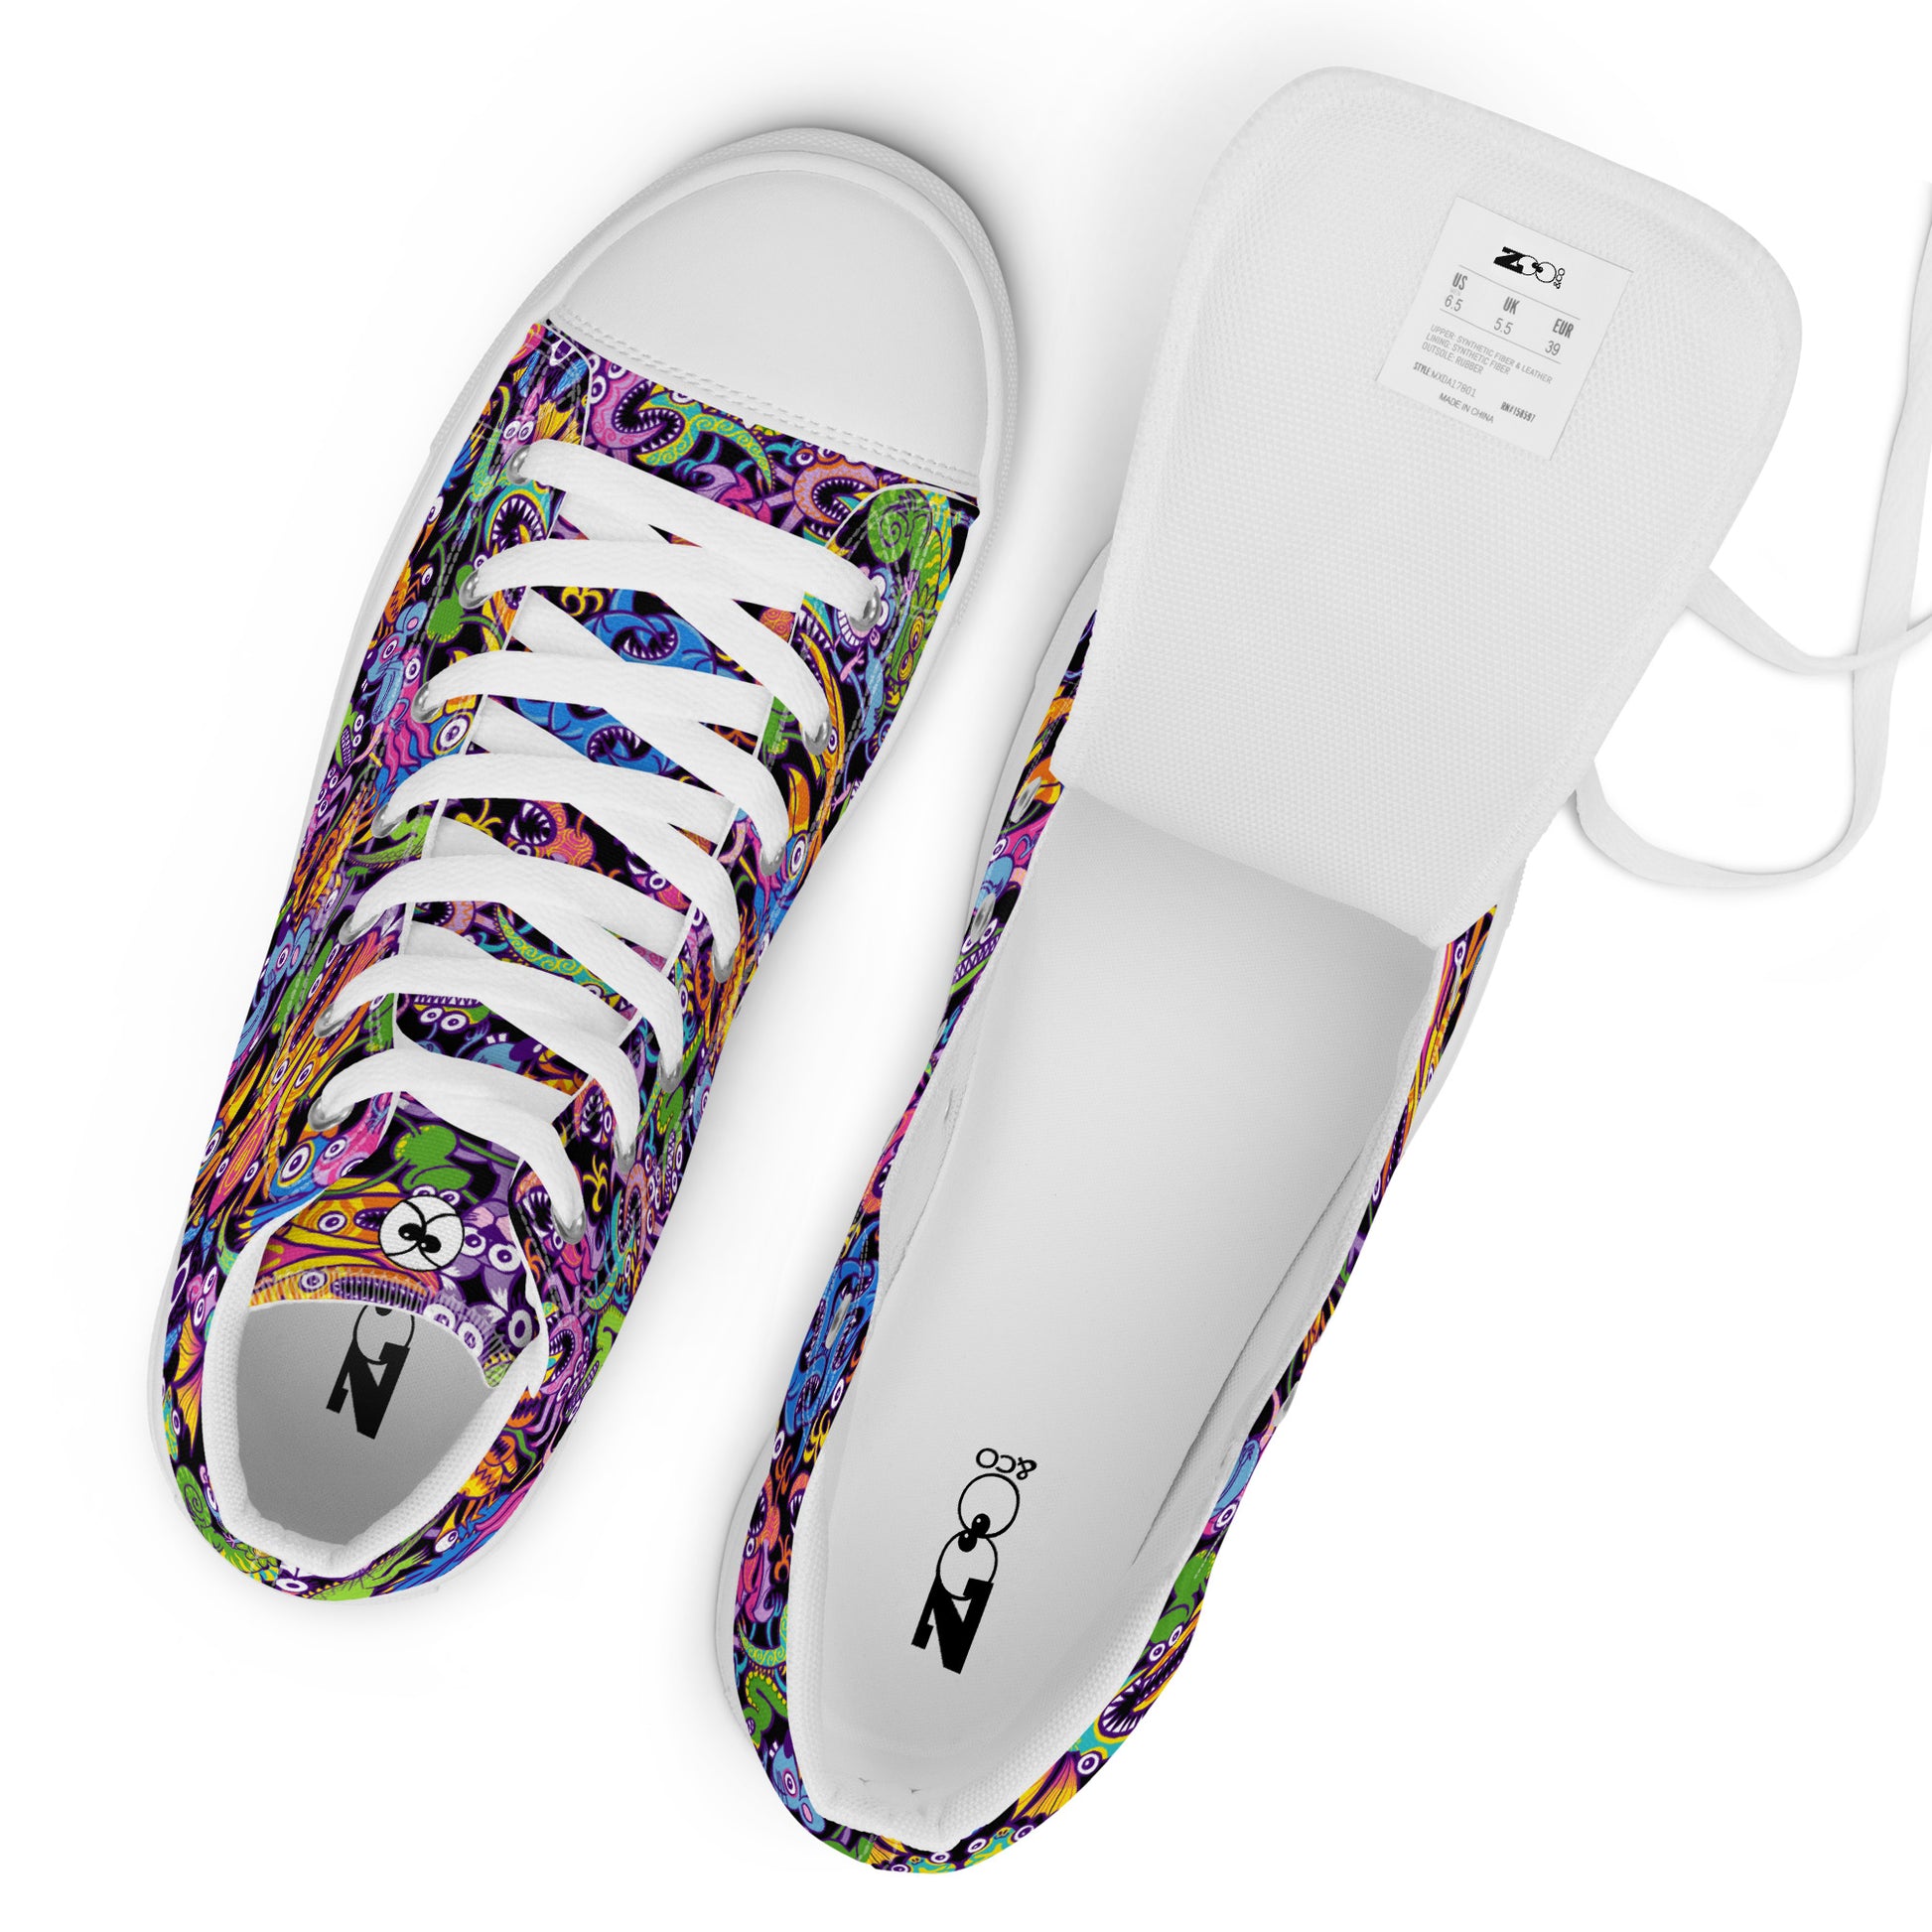 Eccentric critters in a lively crazy festival Men’s high top canvas shoes. Zoo&co branded shoes